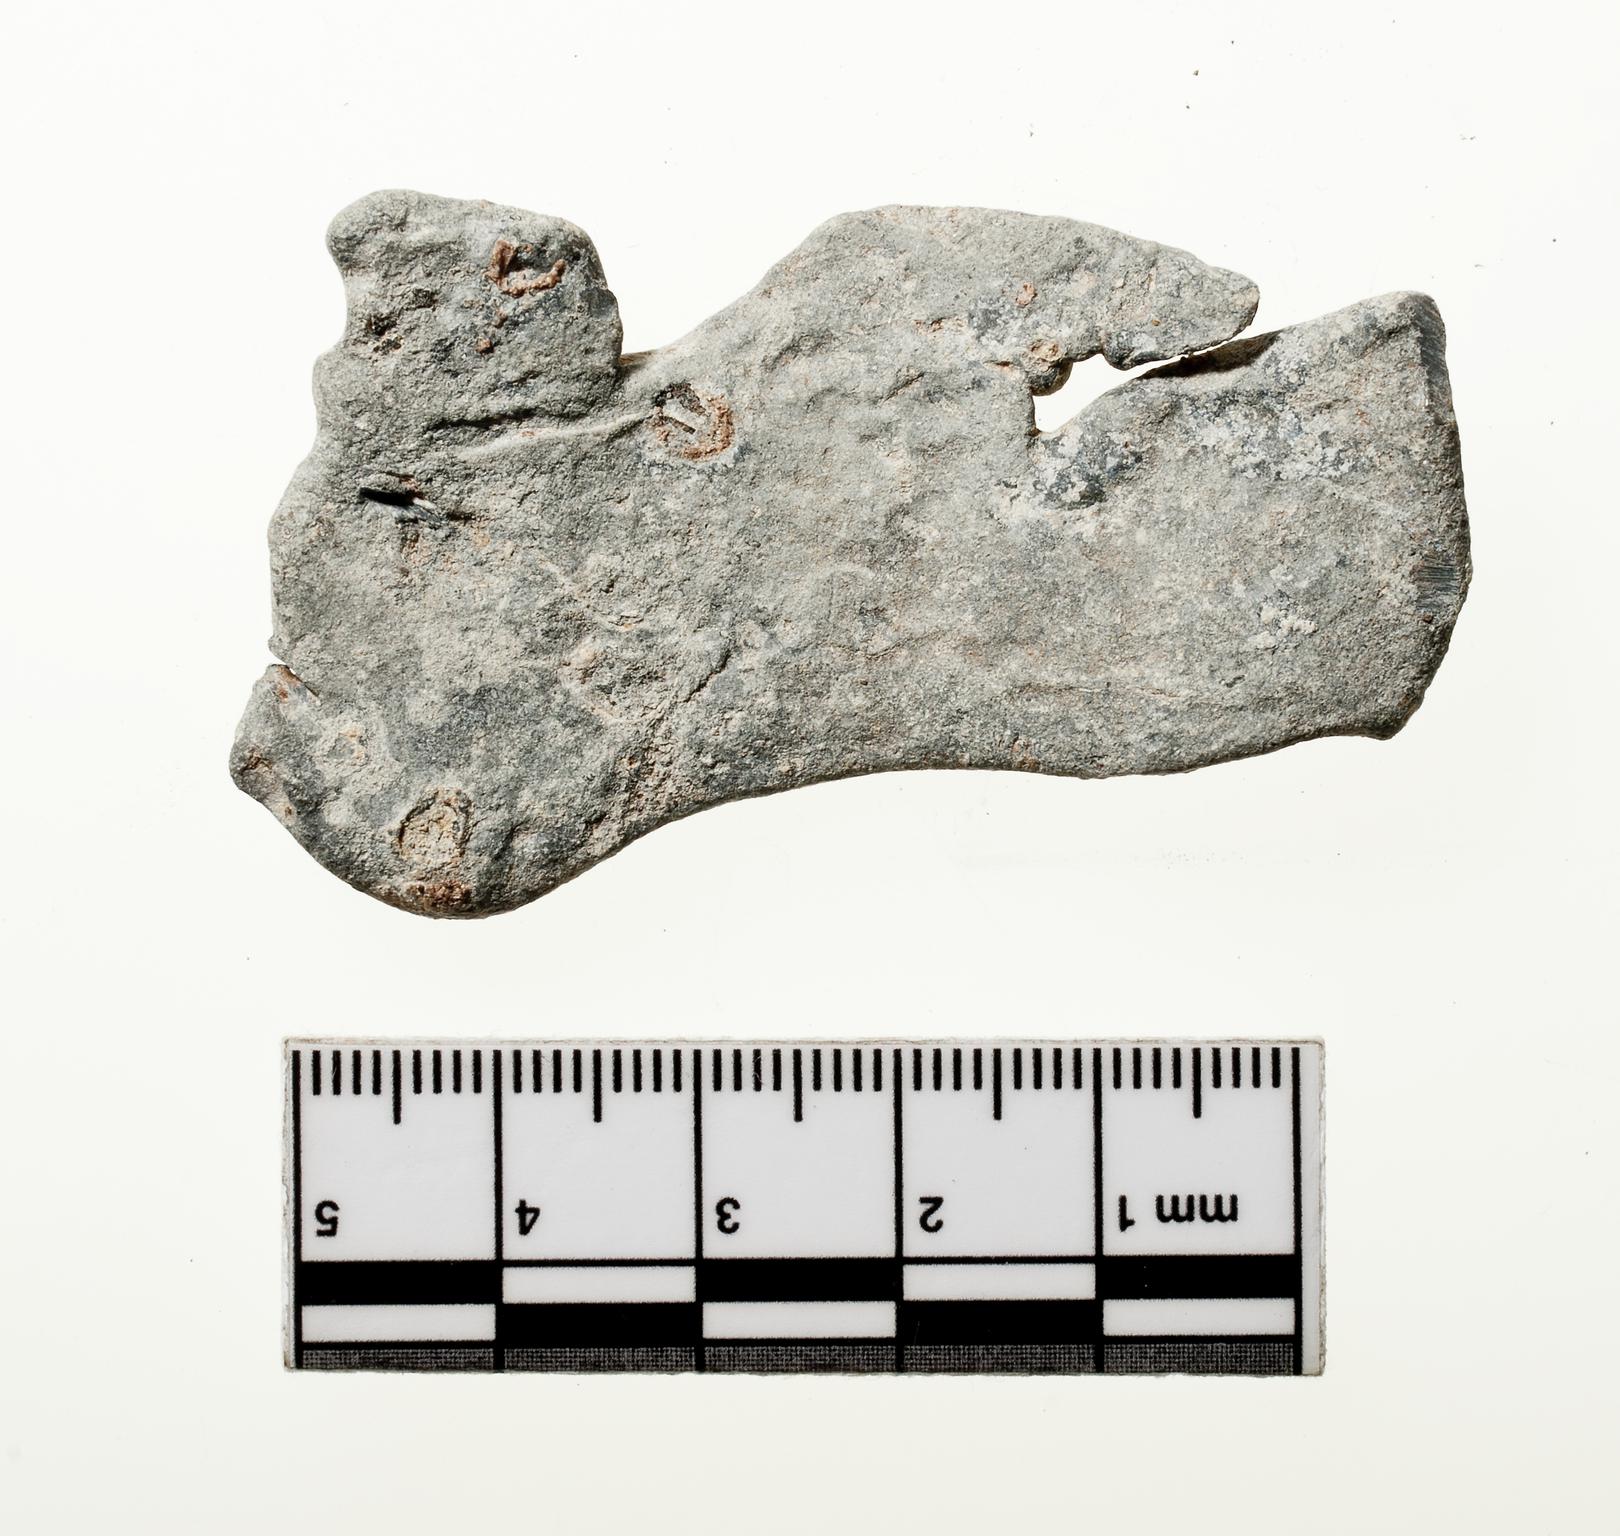 Medieval / Post-Medieval lead object